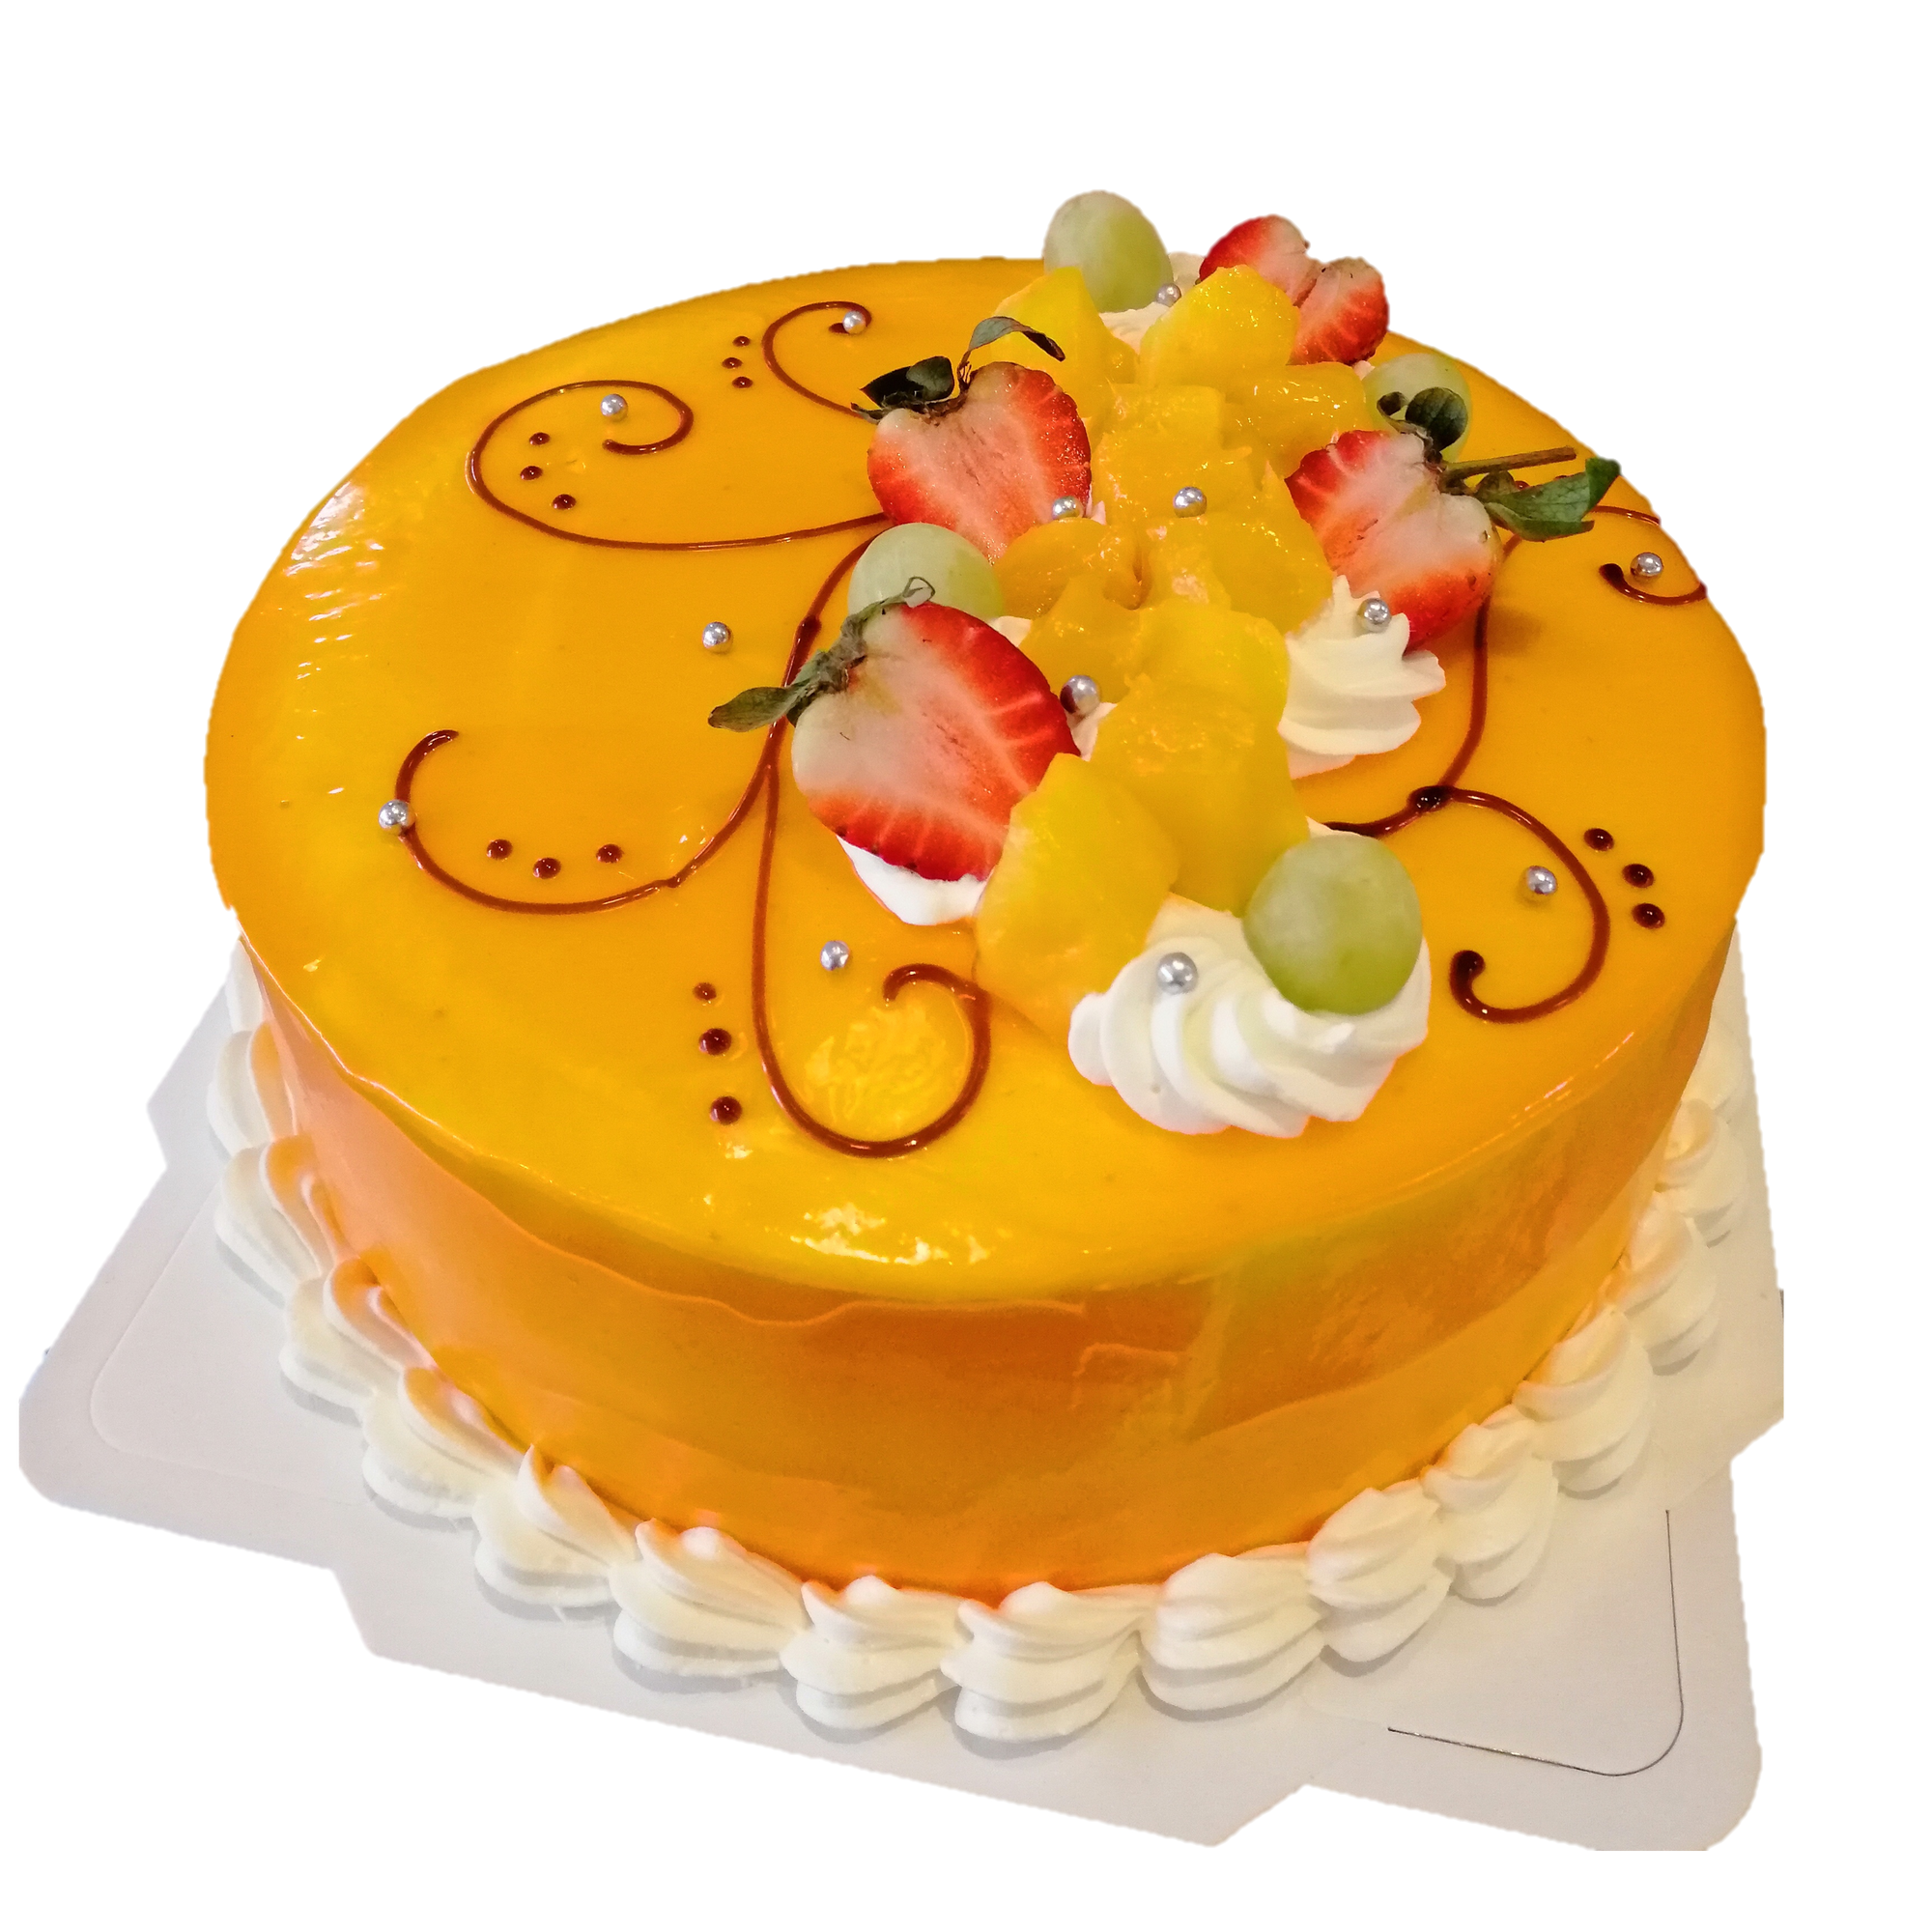 Sweet Boutique by Aditi - Introducing our new flavour- Chocolate Mango Cake  🥭🎂 Truly sinful, delicious & heaped with Alphonso mango 🧡 . . . .  #chocolatemango #chocolatecake #mangocake #chocolatemangocake #aditigarware  #sweetboutiquebyaditi | Facebook